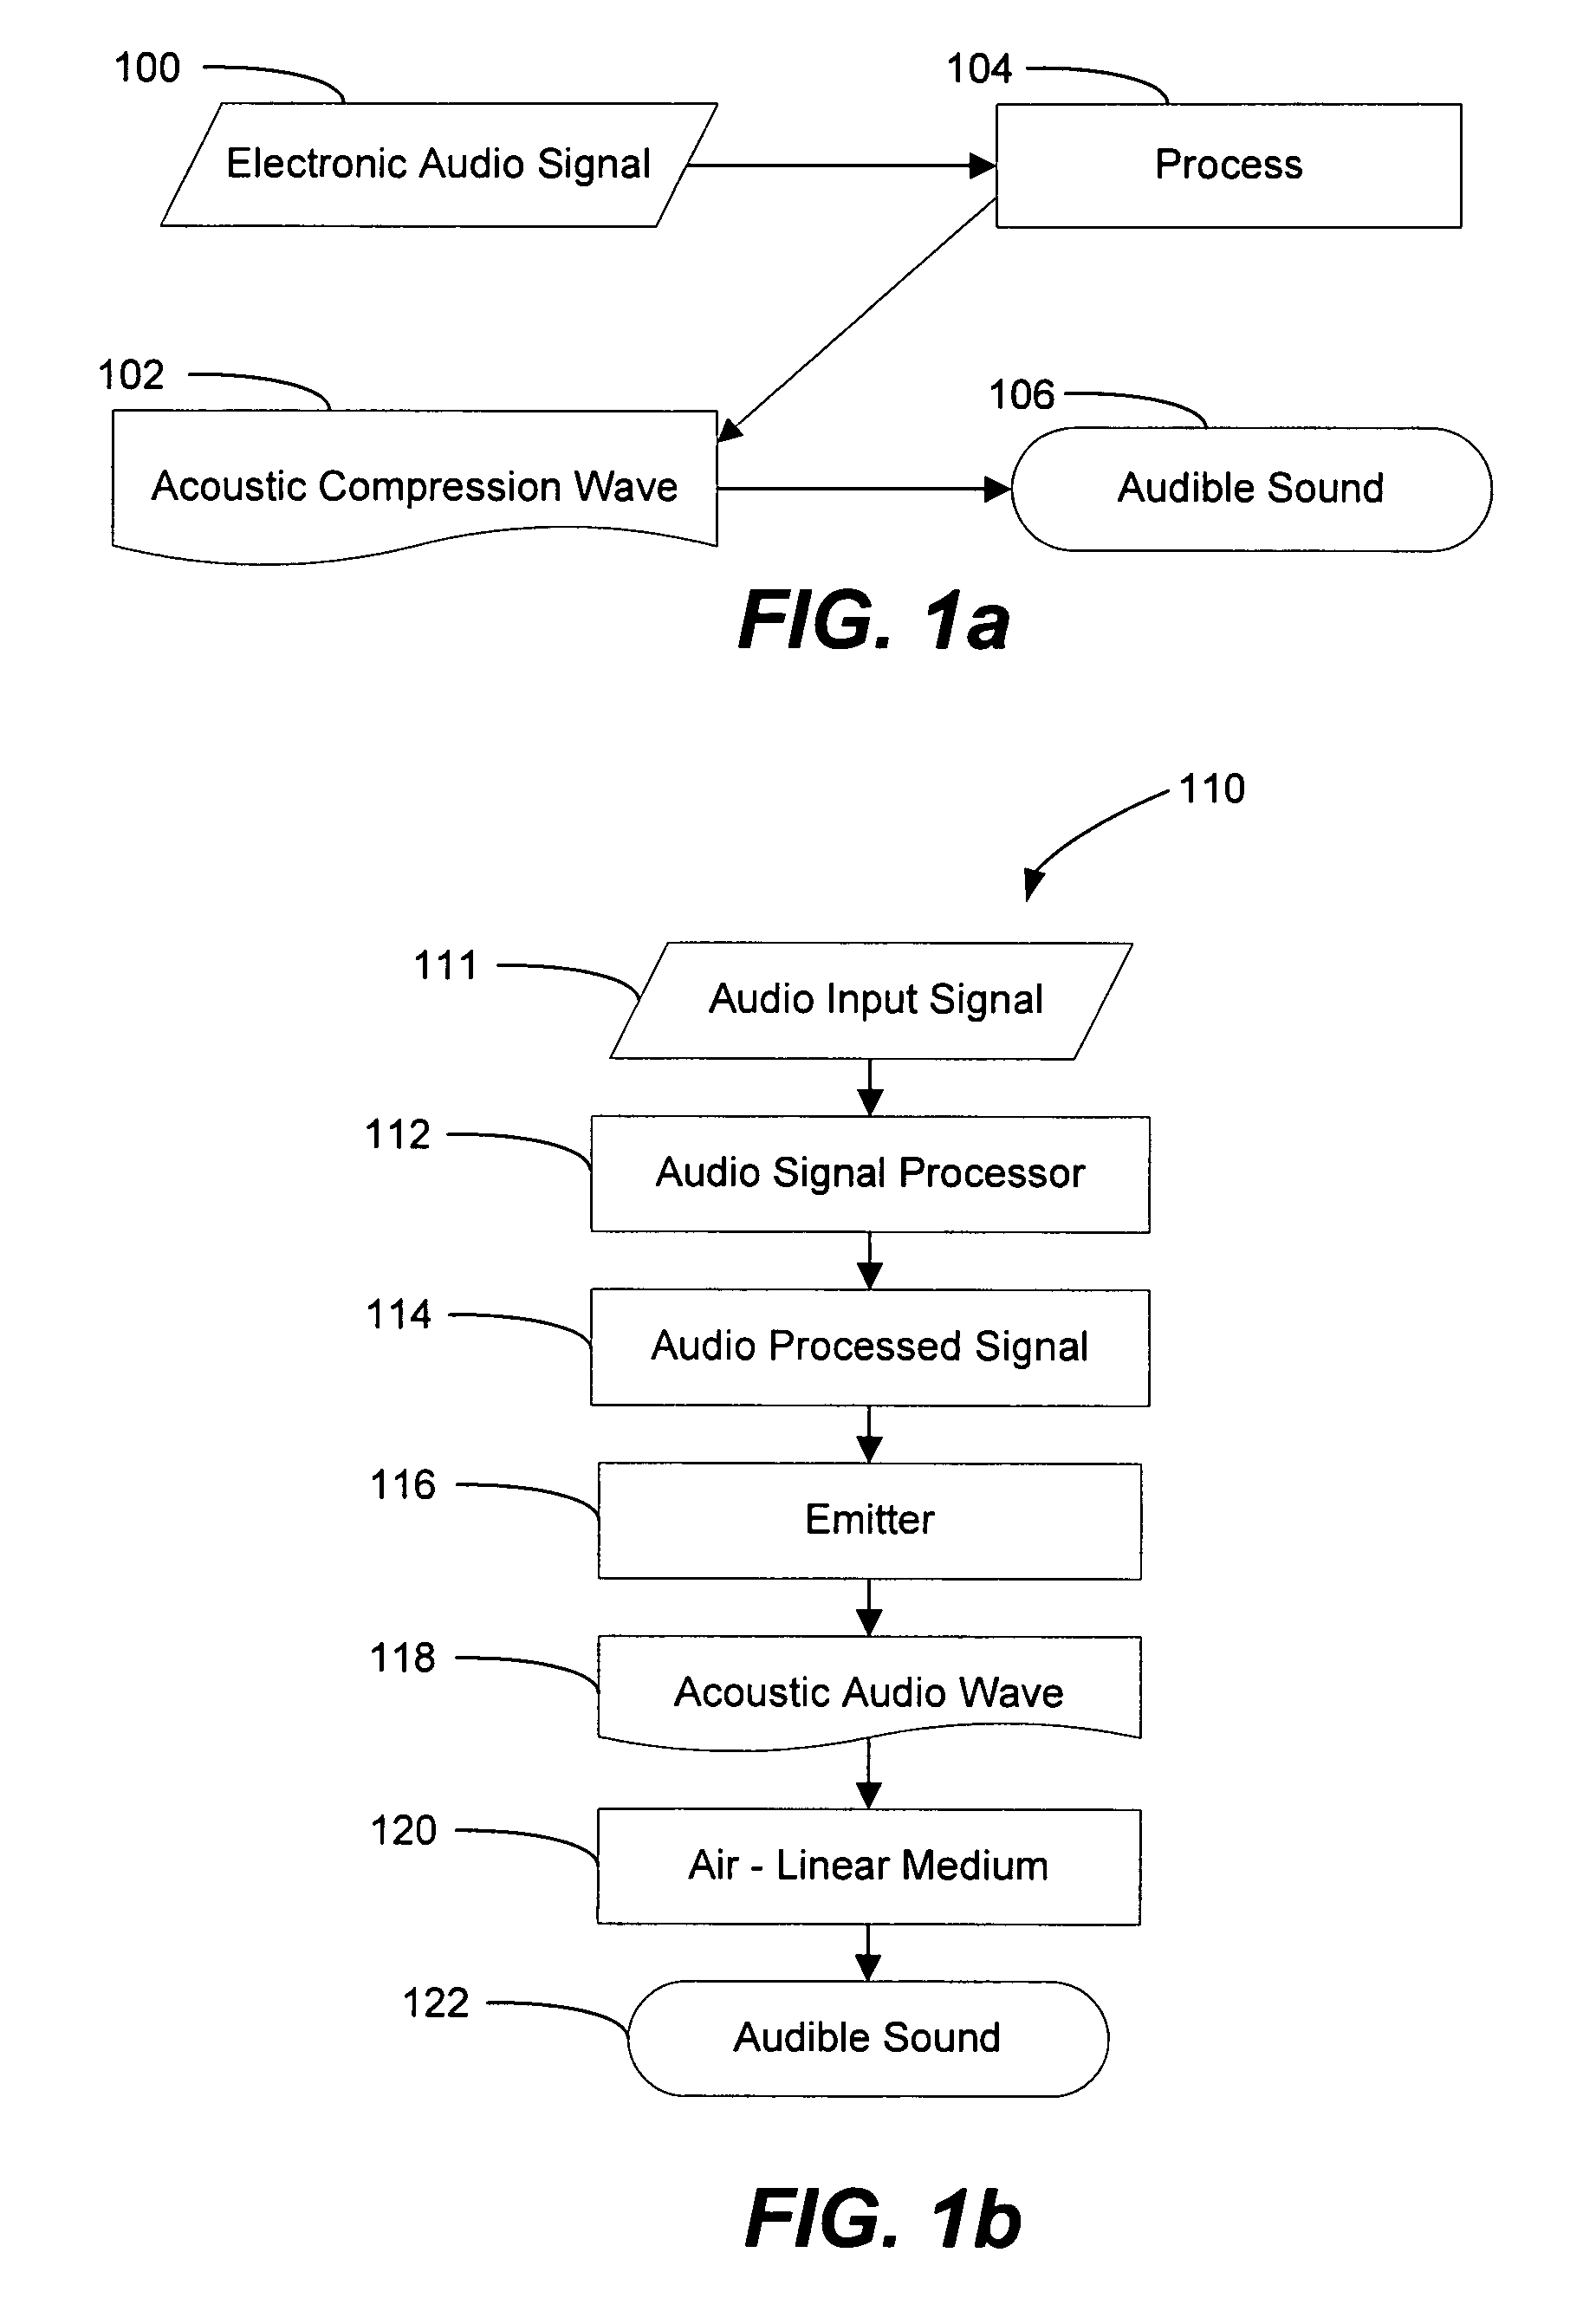 Parametric audio system for operation in a saturated air medium